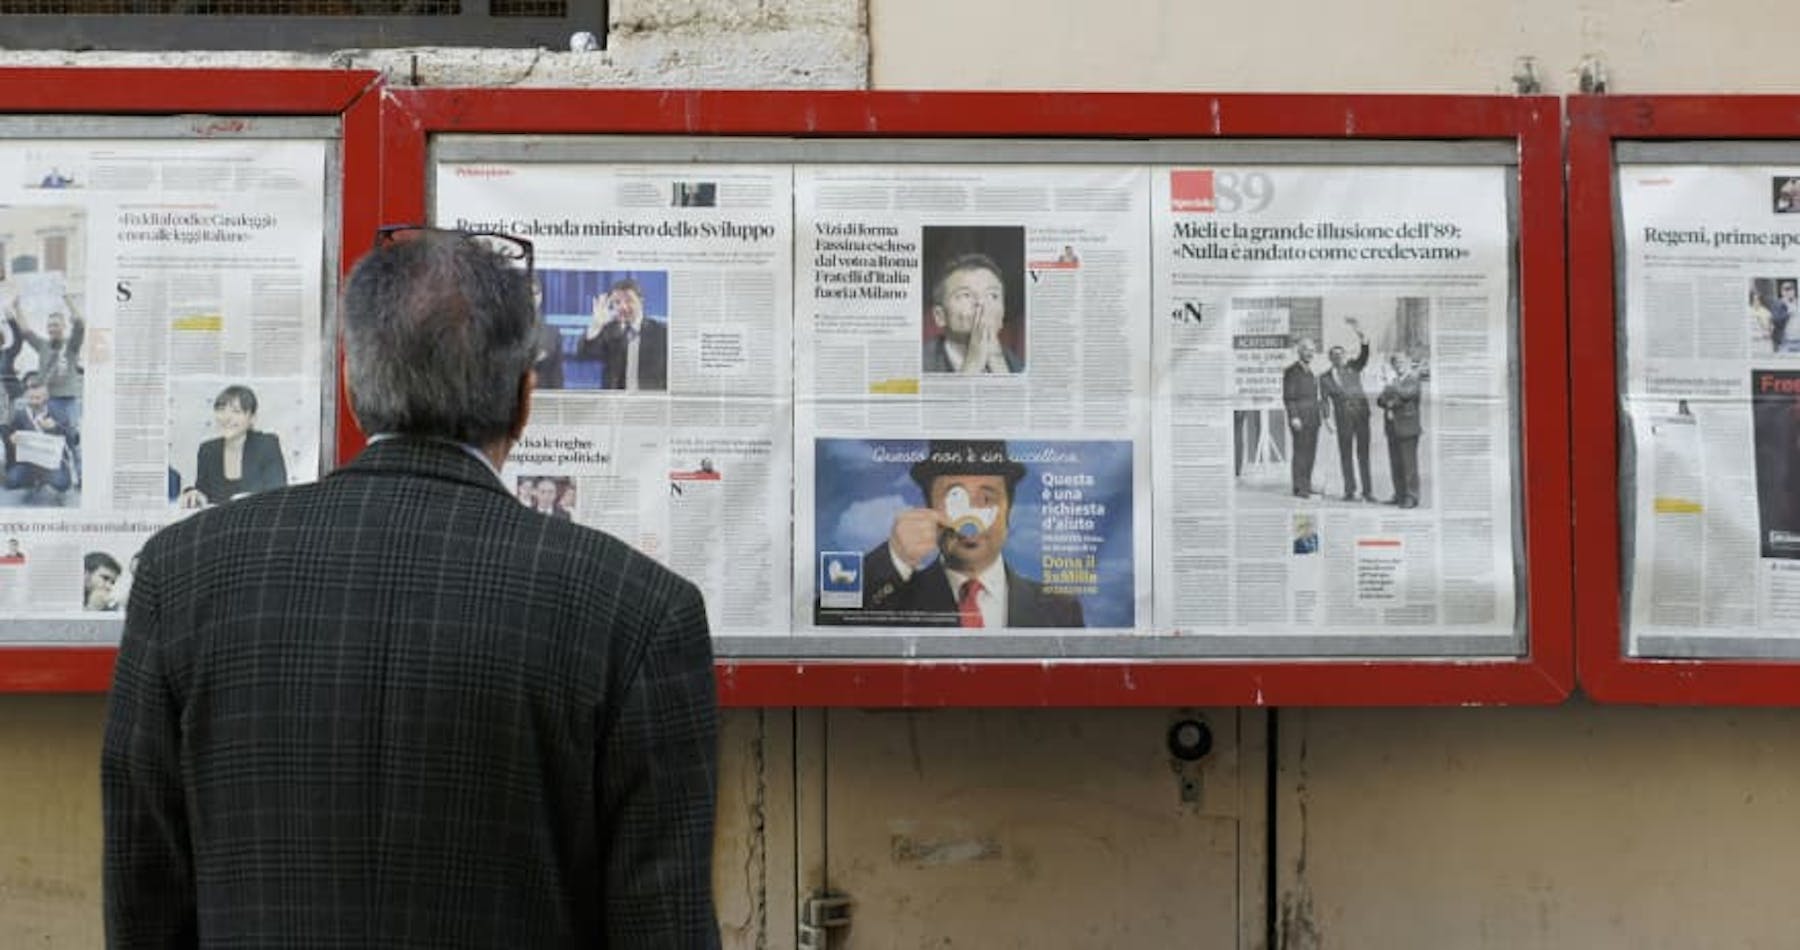 man in suit looking at newsboard